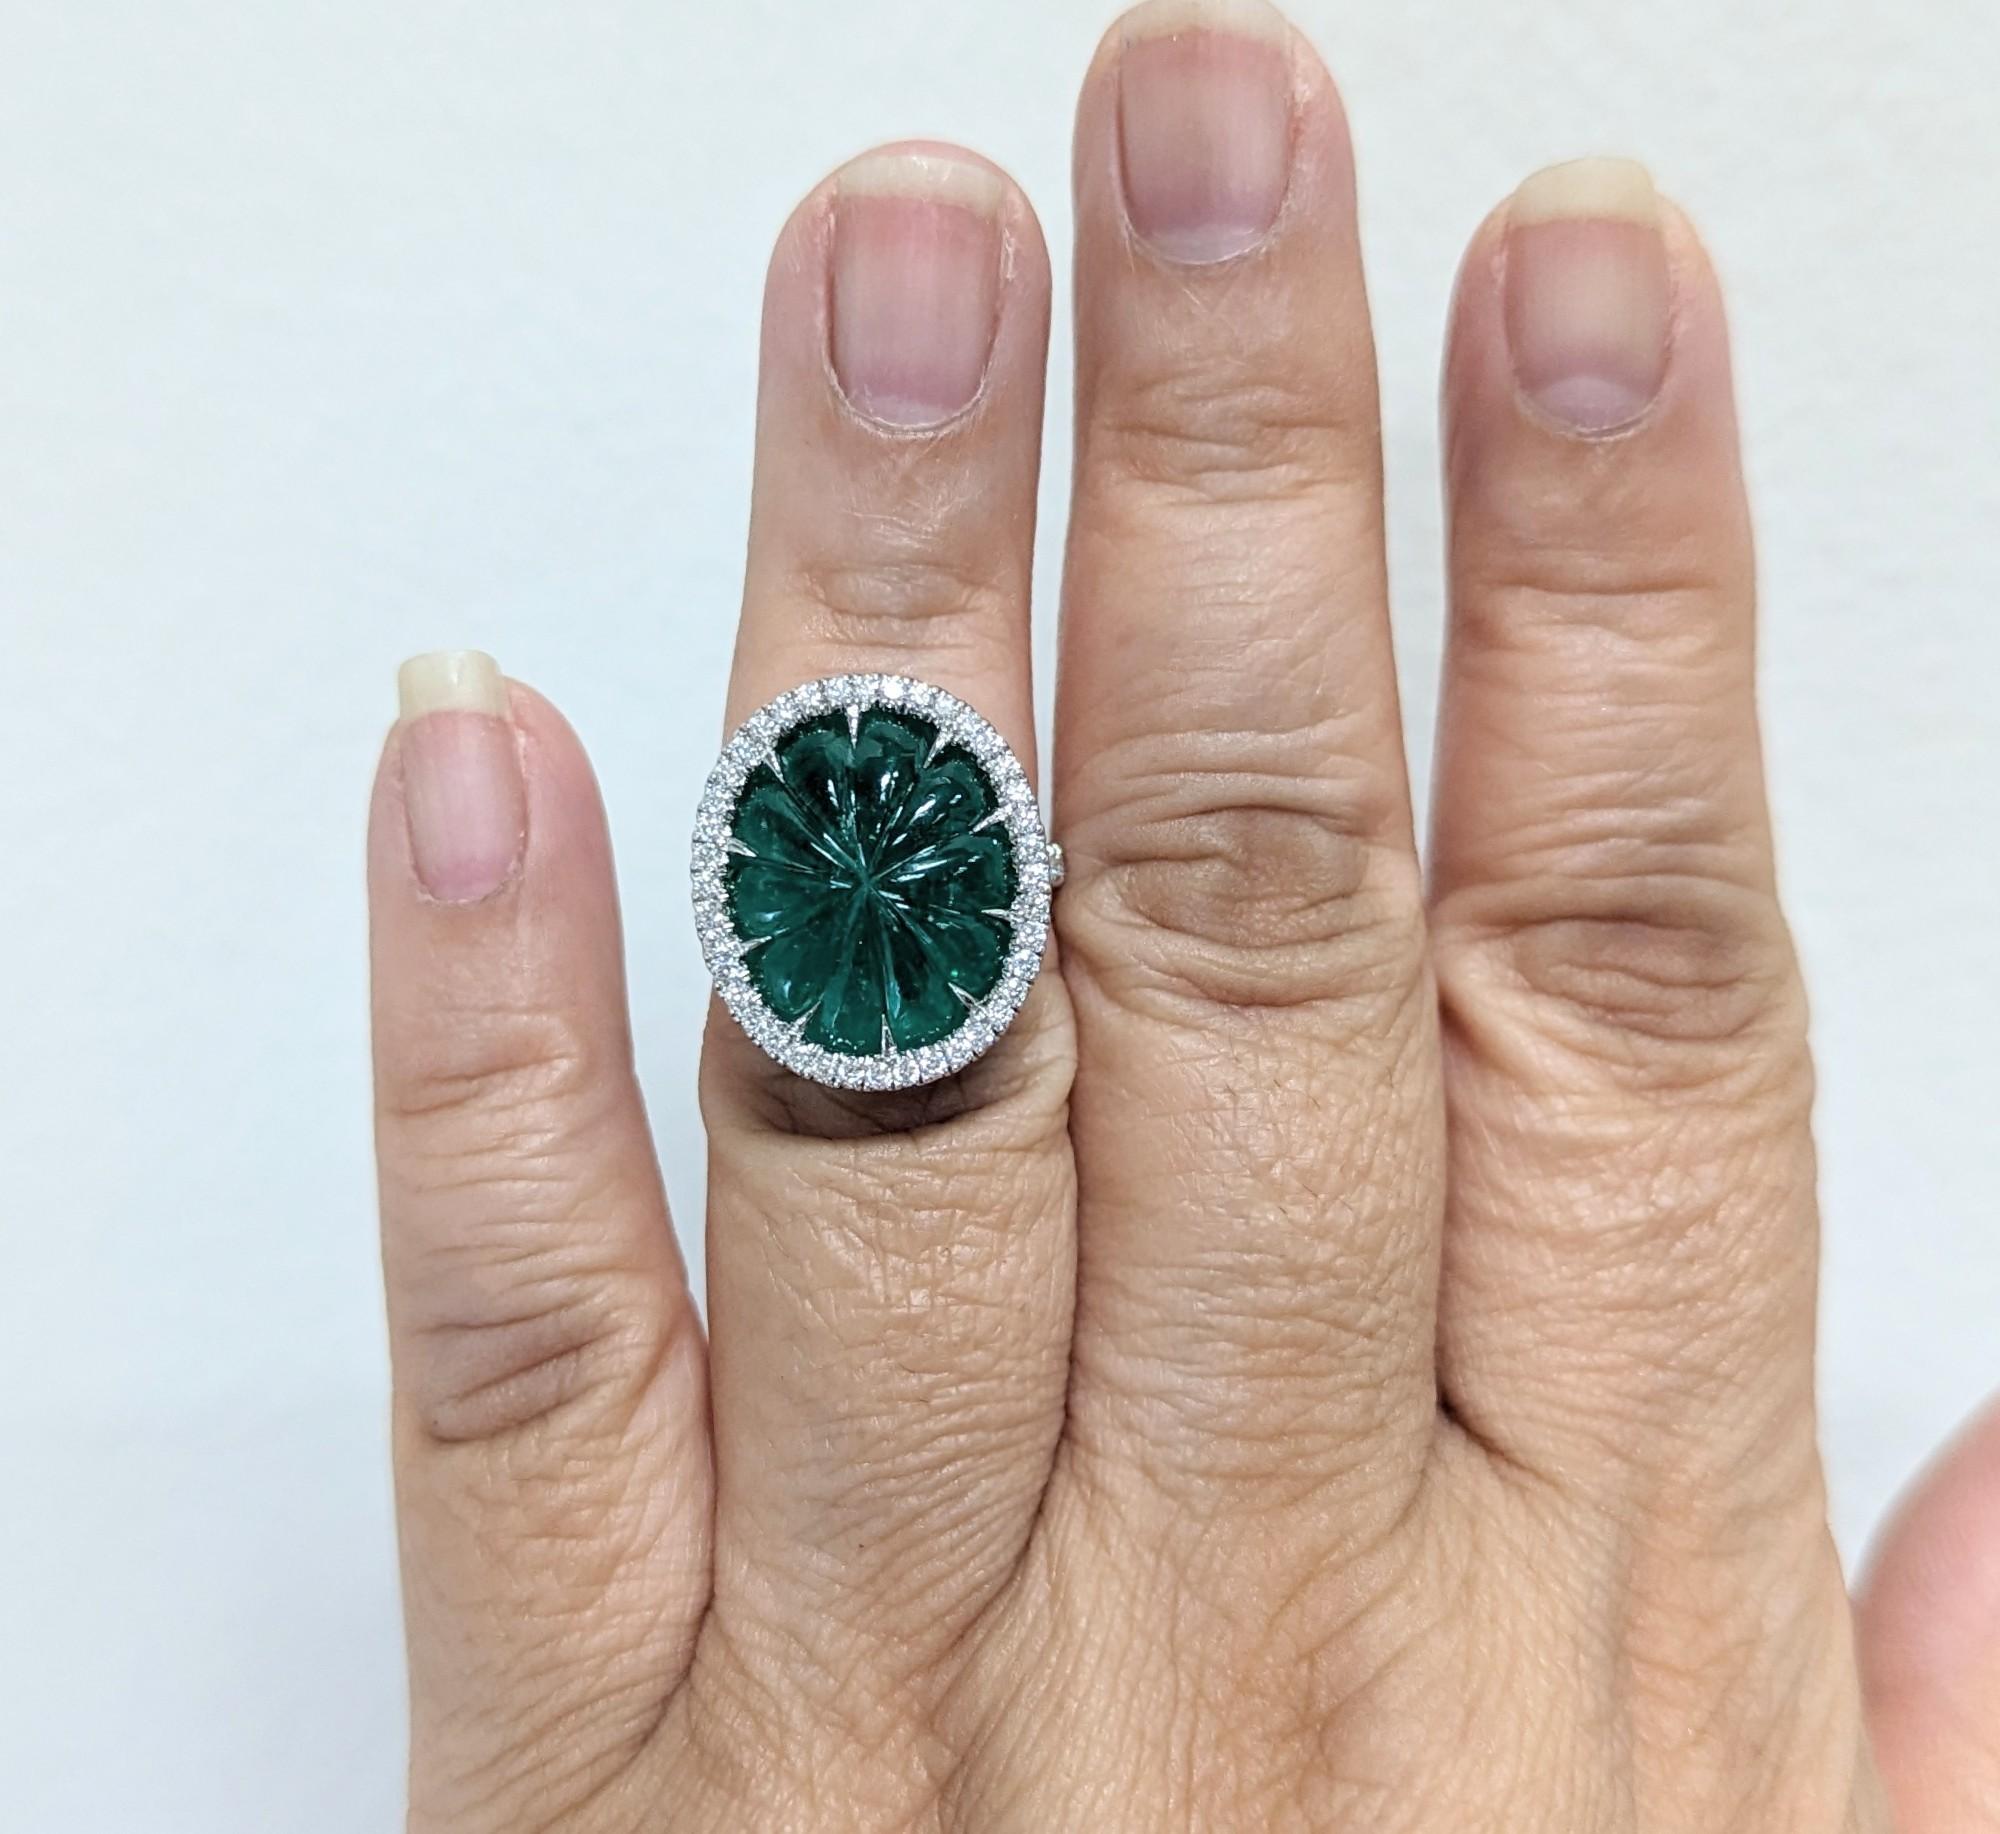 Absolutely stunning 12.69 ct. C. Dunaigre certified Colombian oval emerald with 0.79 ct. good quality white diamond rounds.  Handmade in platinum.  Ring size 6.5.  Certification is included.